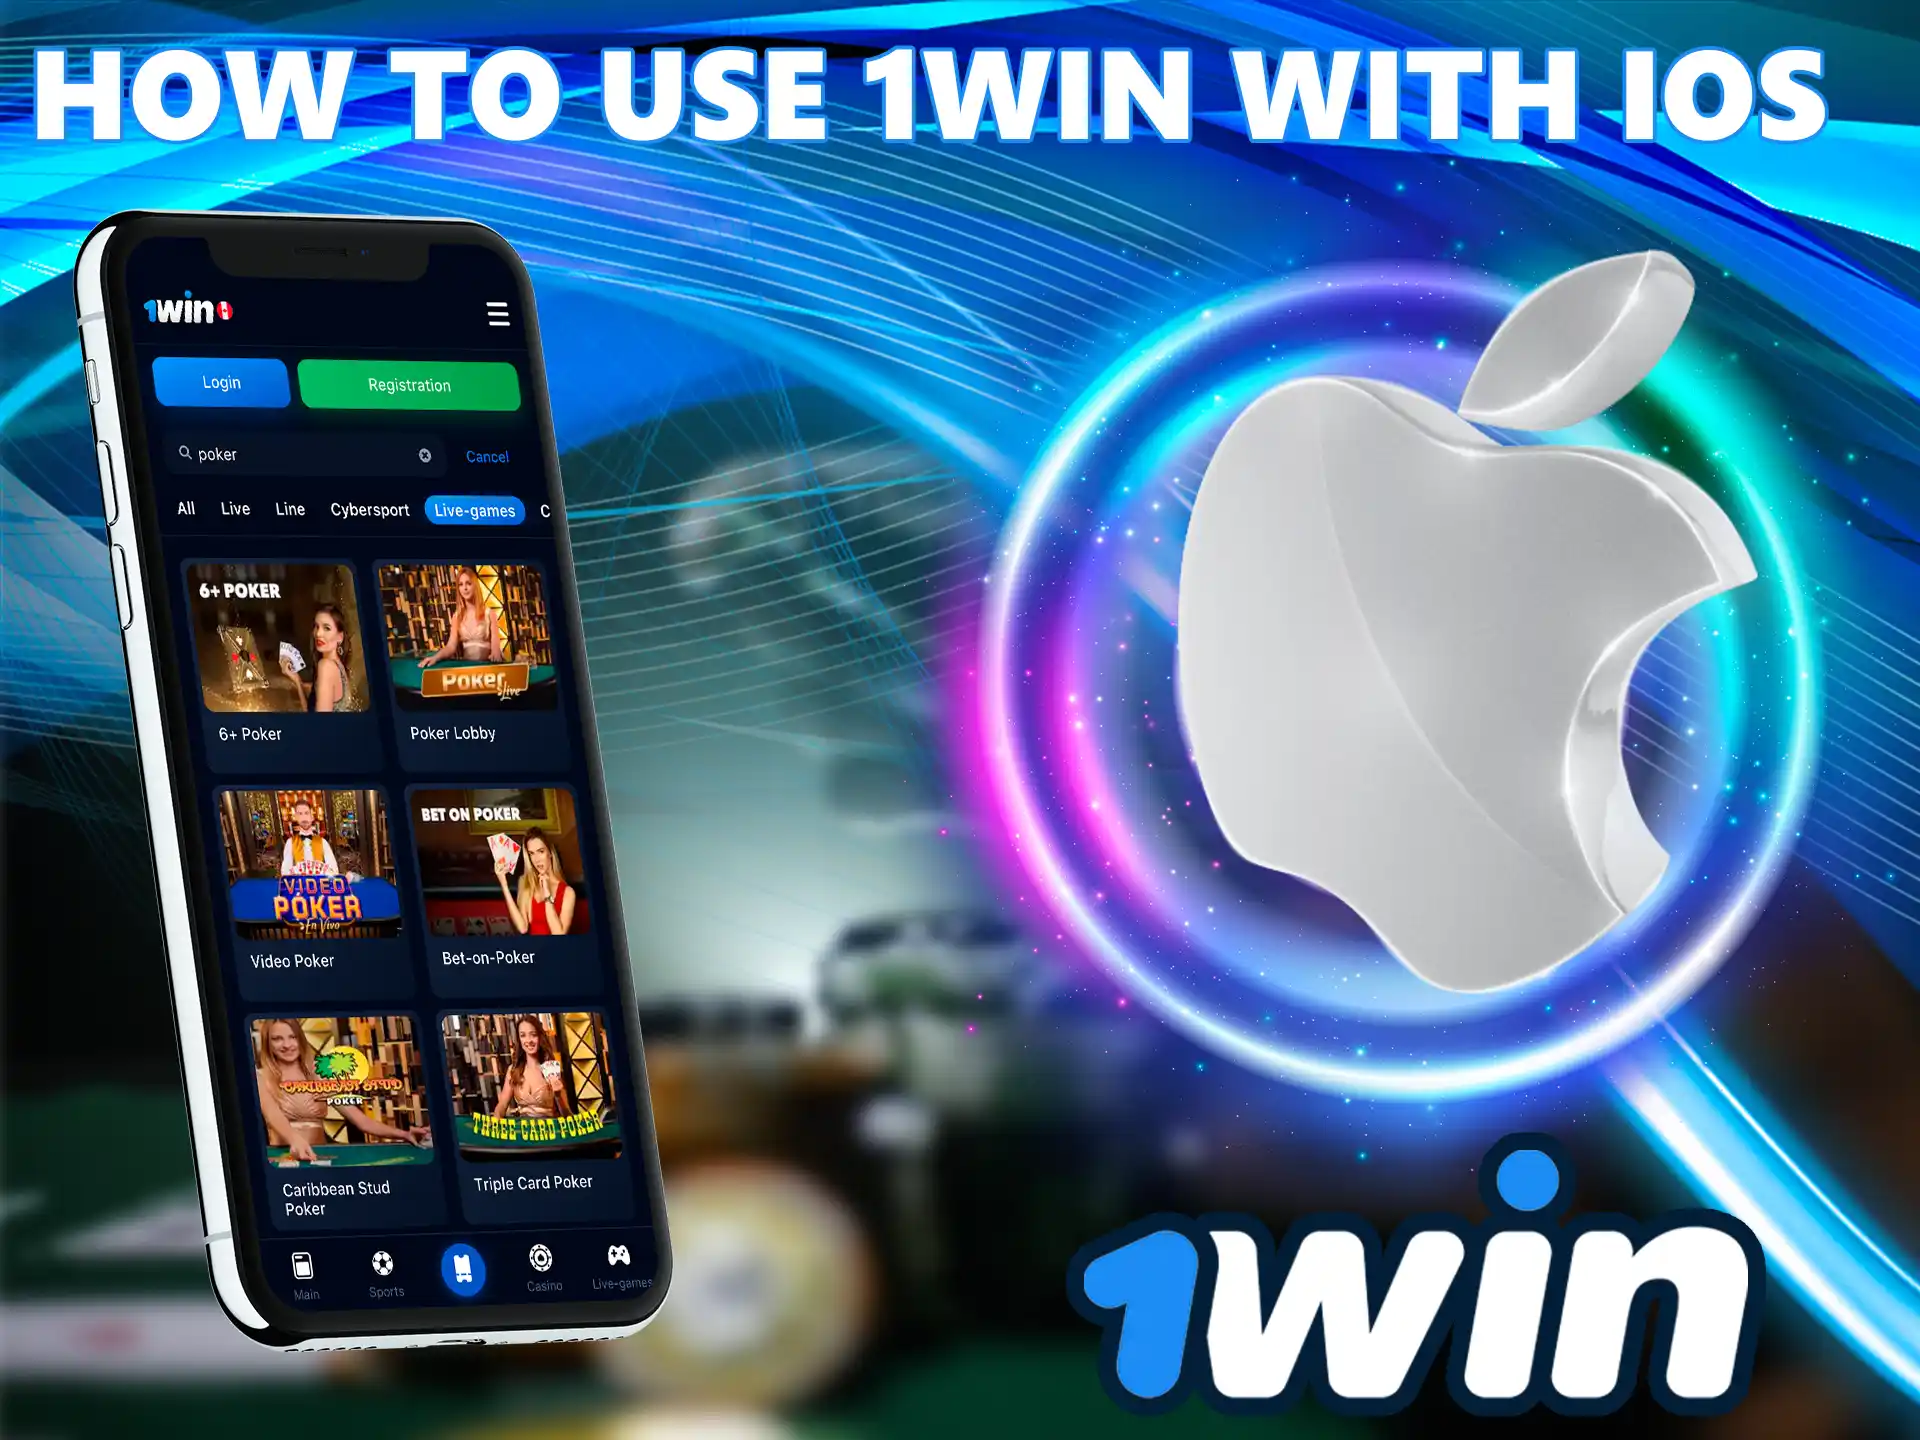 You can launch the 1Win app on Apple devices, follow our guide for easy understanding.